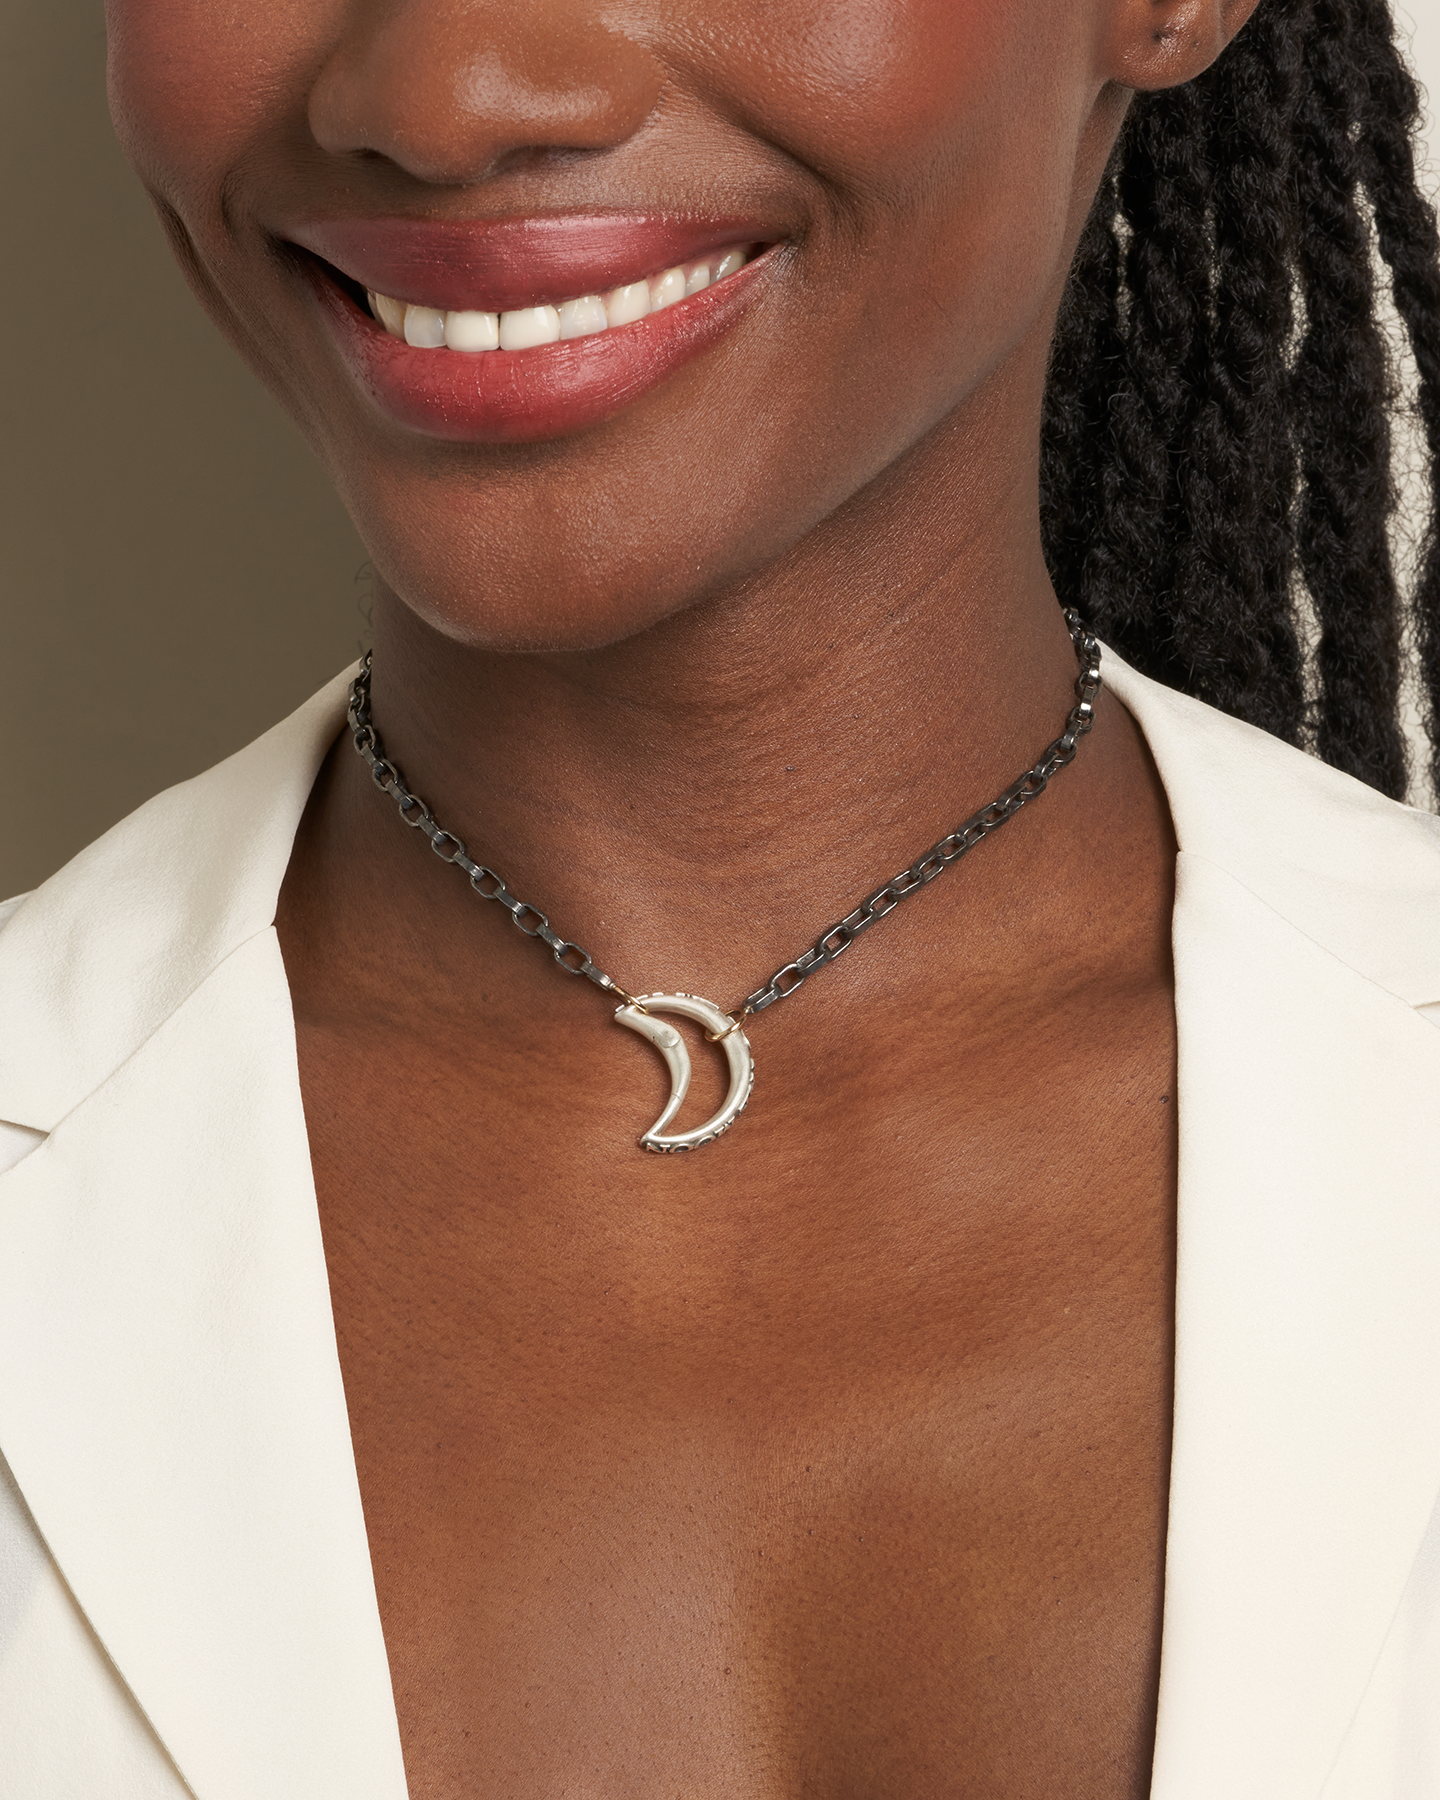 Close up of woman's forward-facing decolletage wearing fly me to the moon necklace